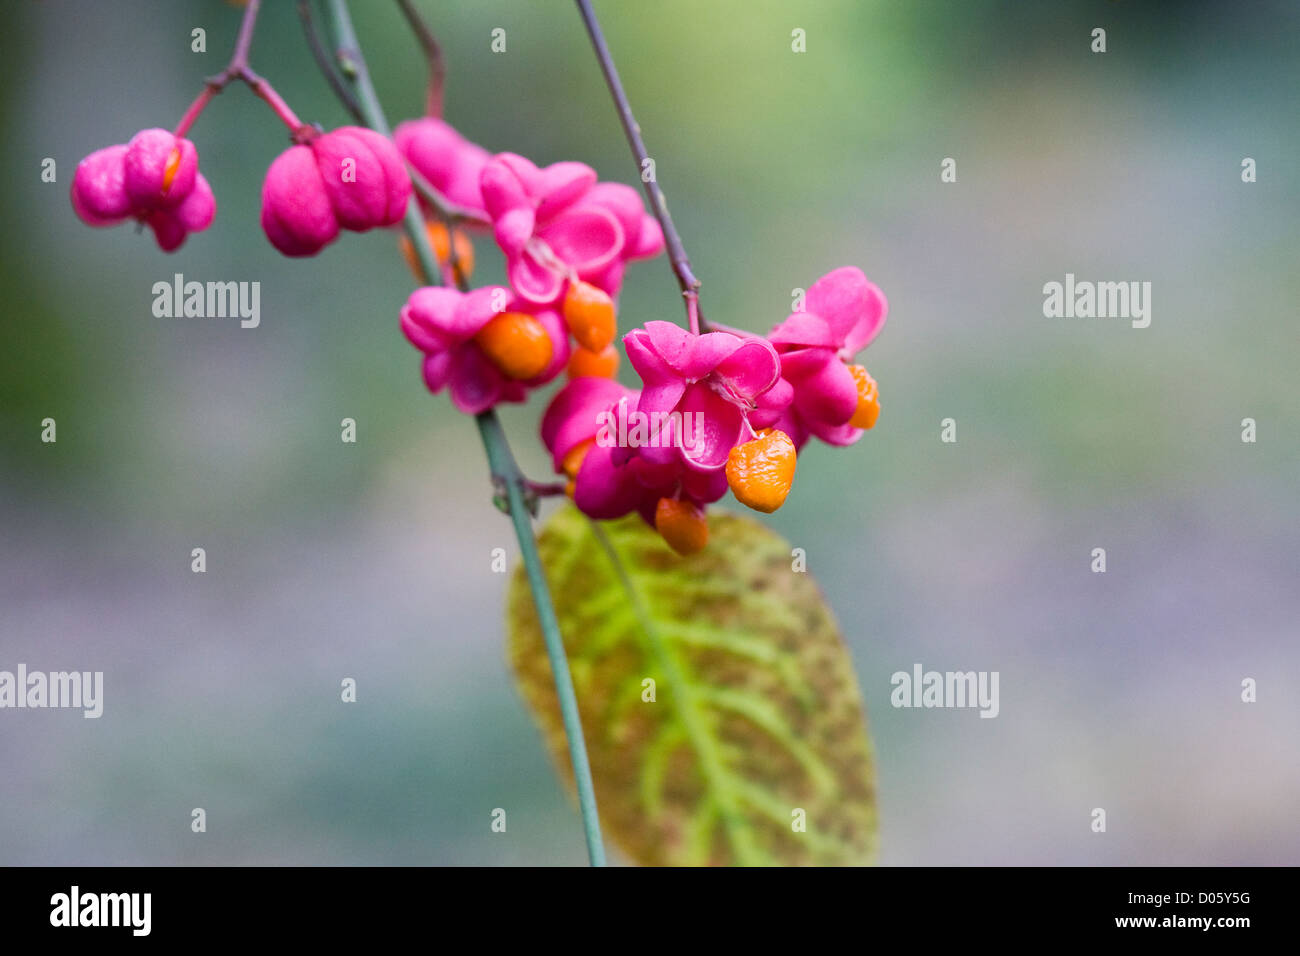 Euonymus europaeus. Fruit of the common spindle plant splitting to reveal the bright orange seed inside. Stock Photo